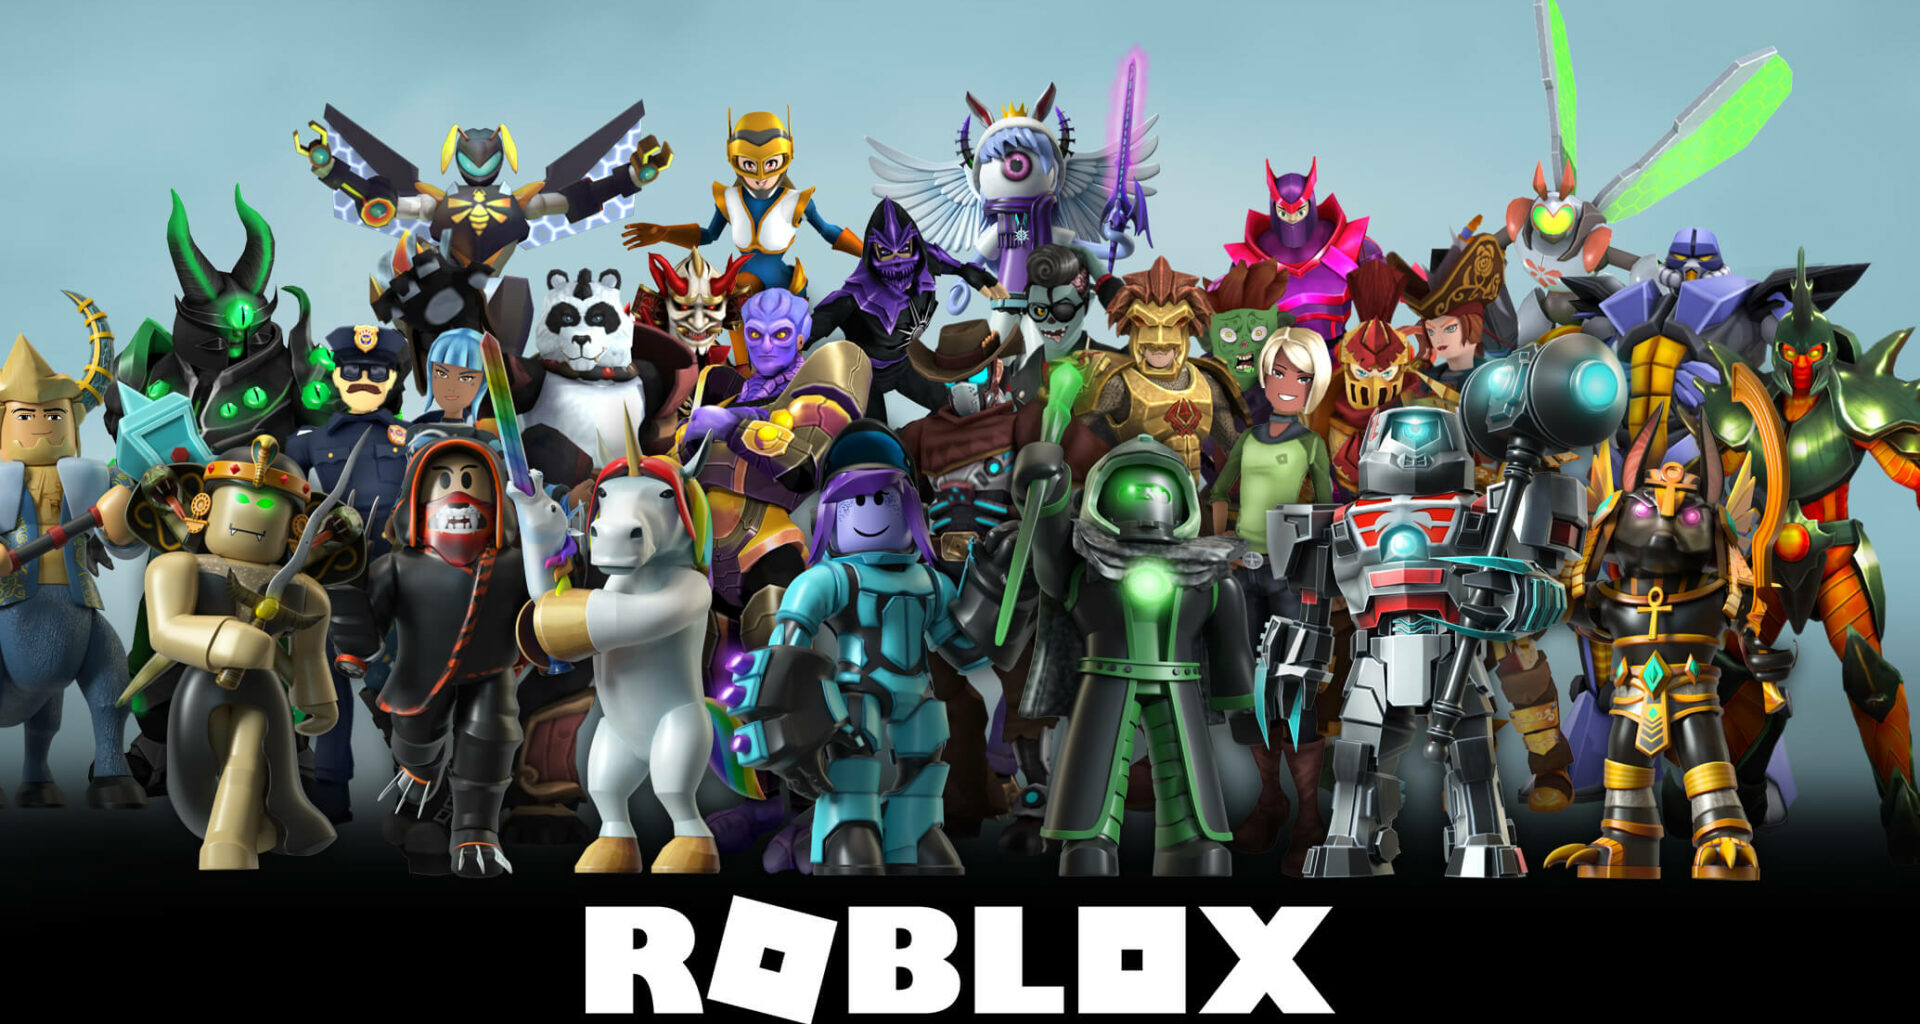 Download Roblox Apk For Free If You Can T Get Minecraft Apk Legally - roblox apk mod pc